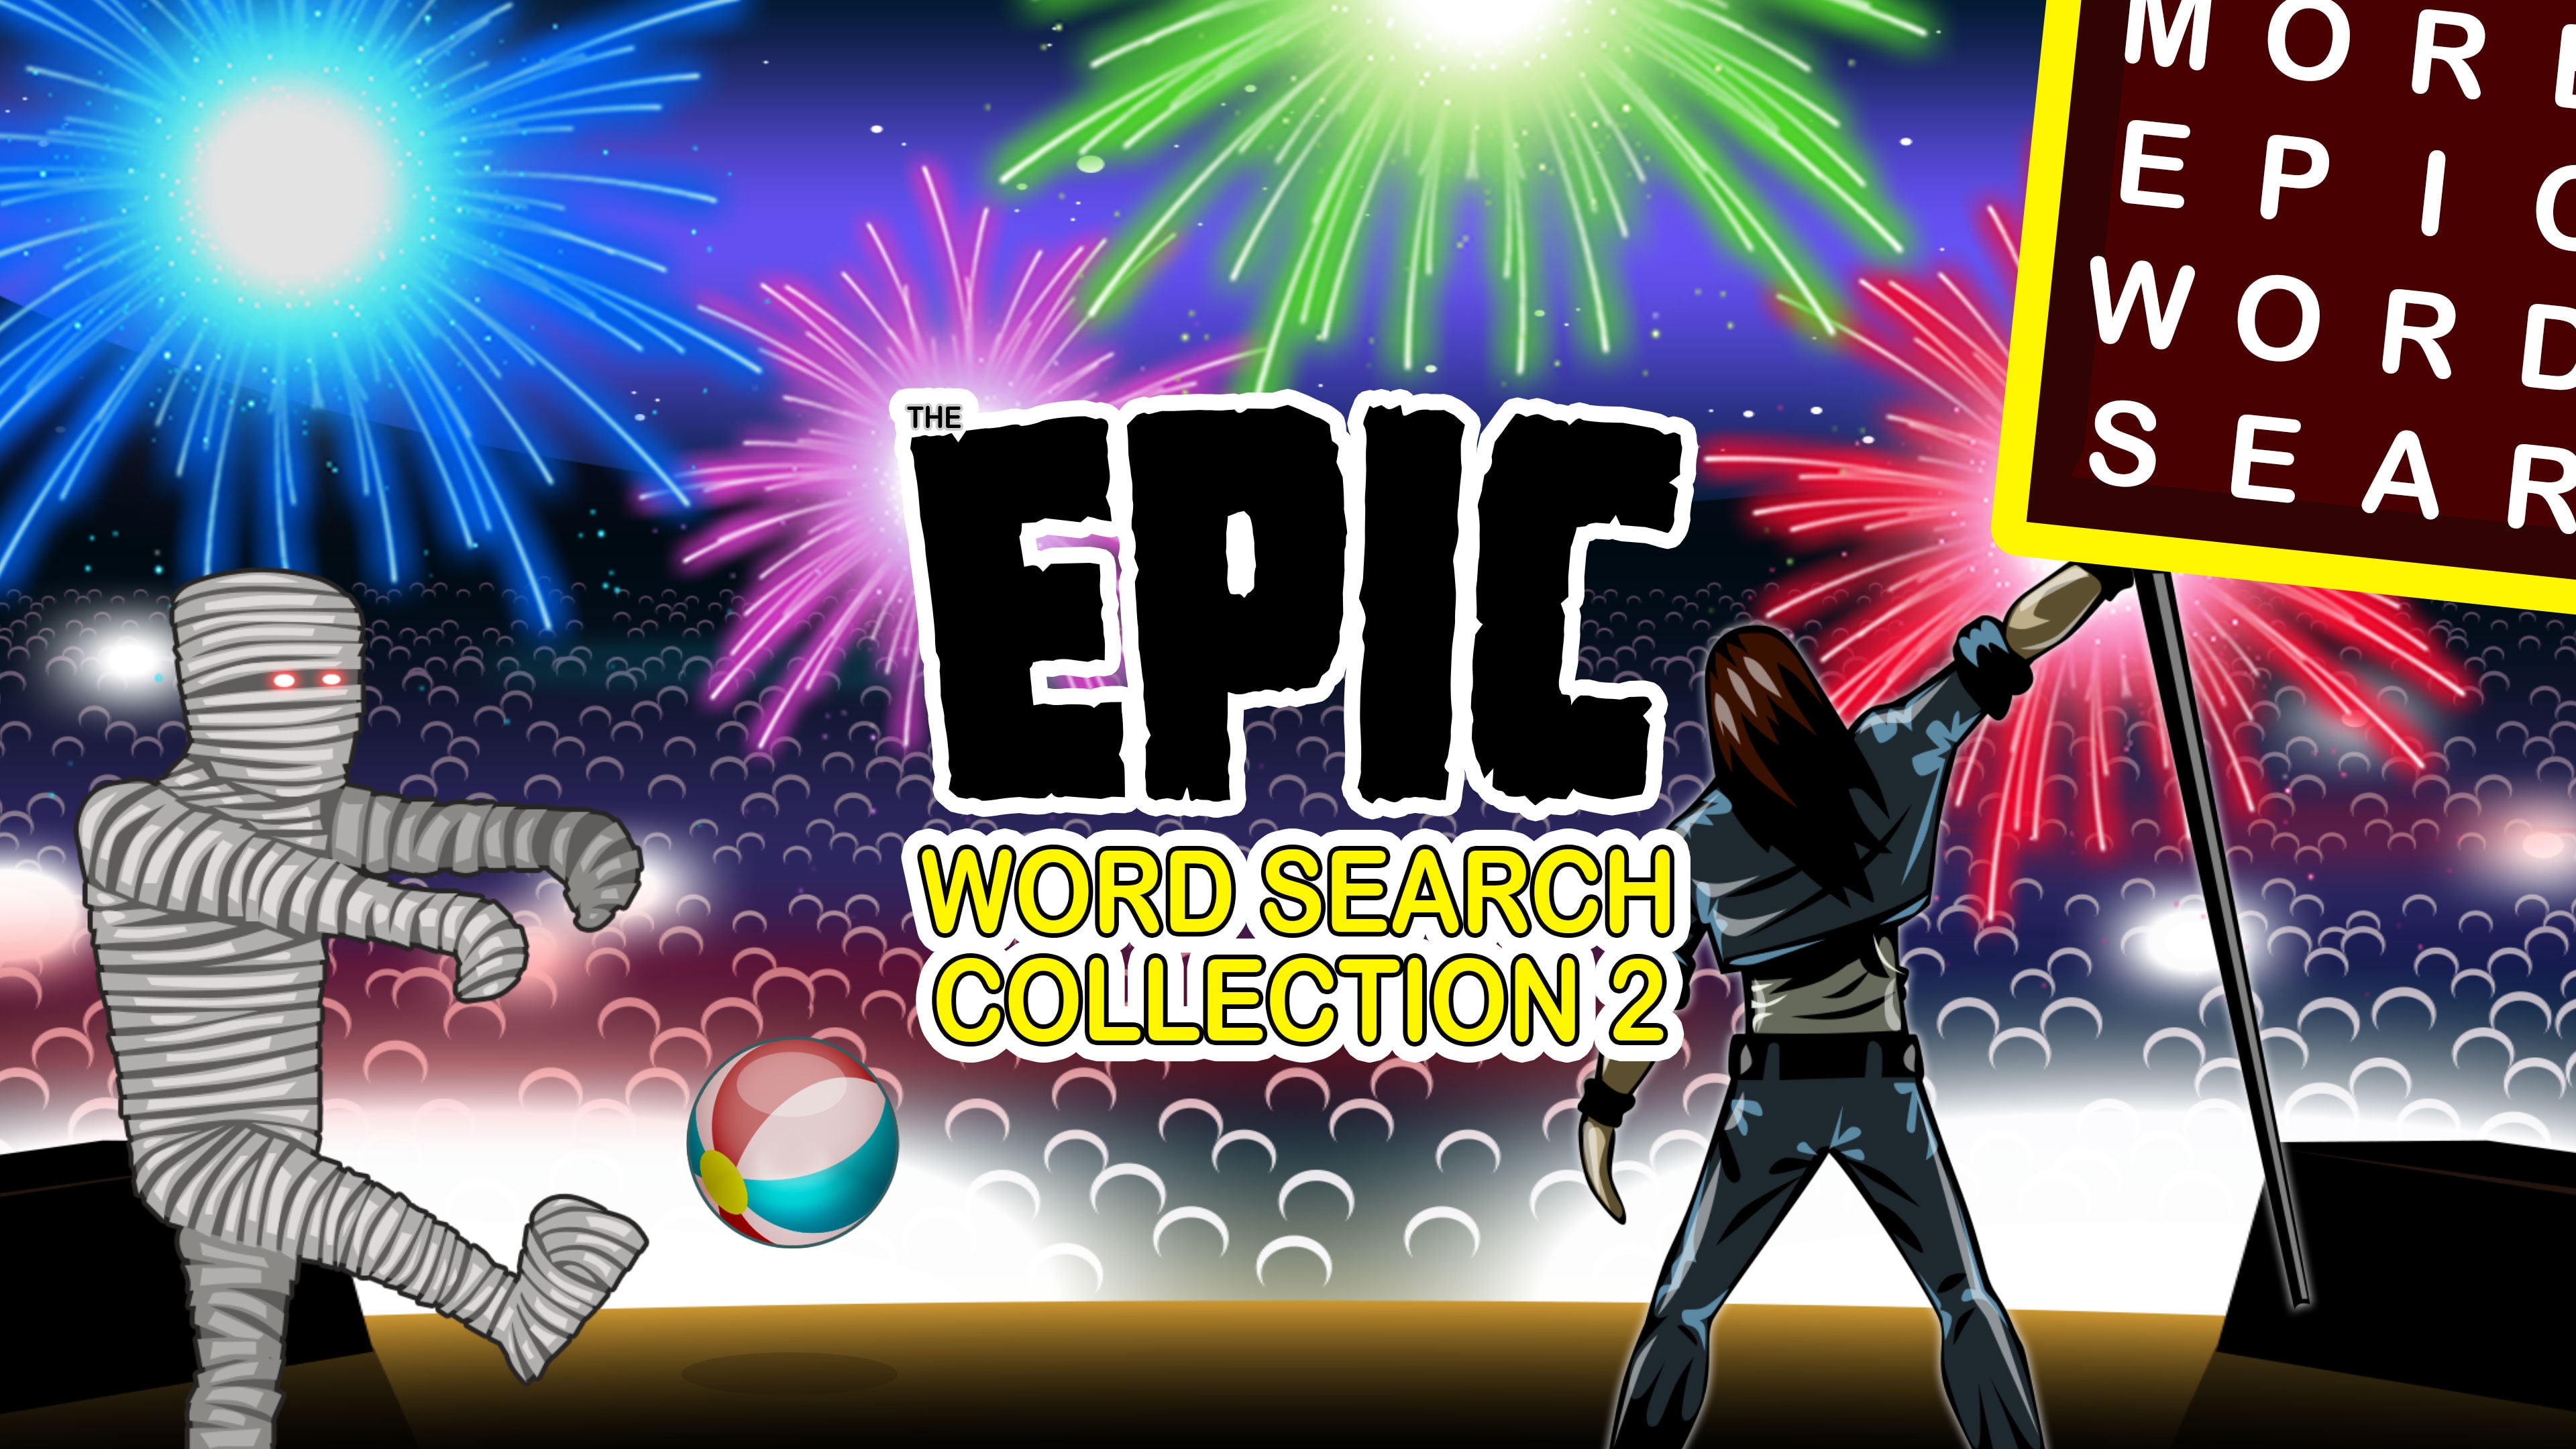 Epic Word Search Collection 2 (English)